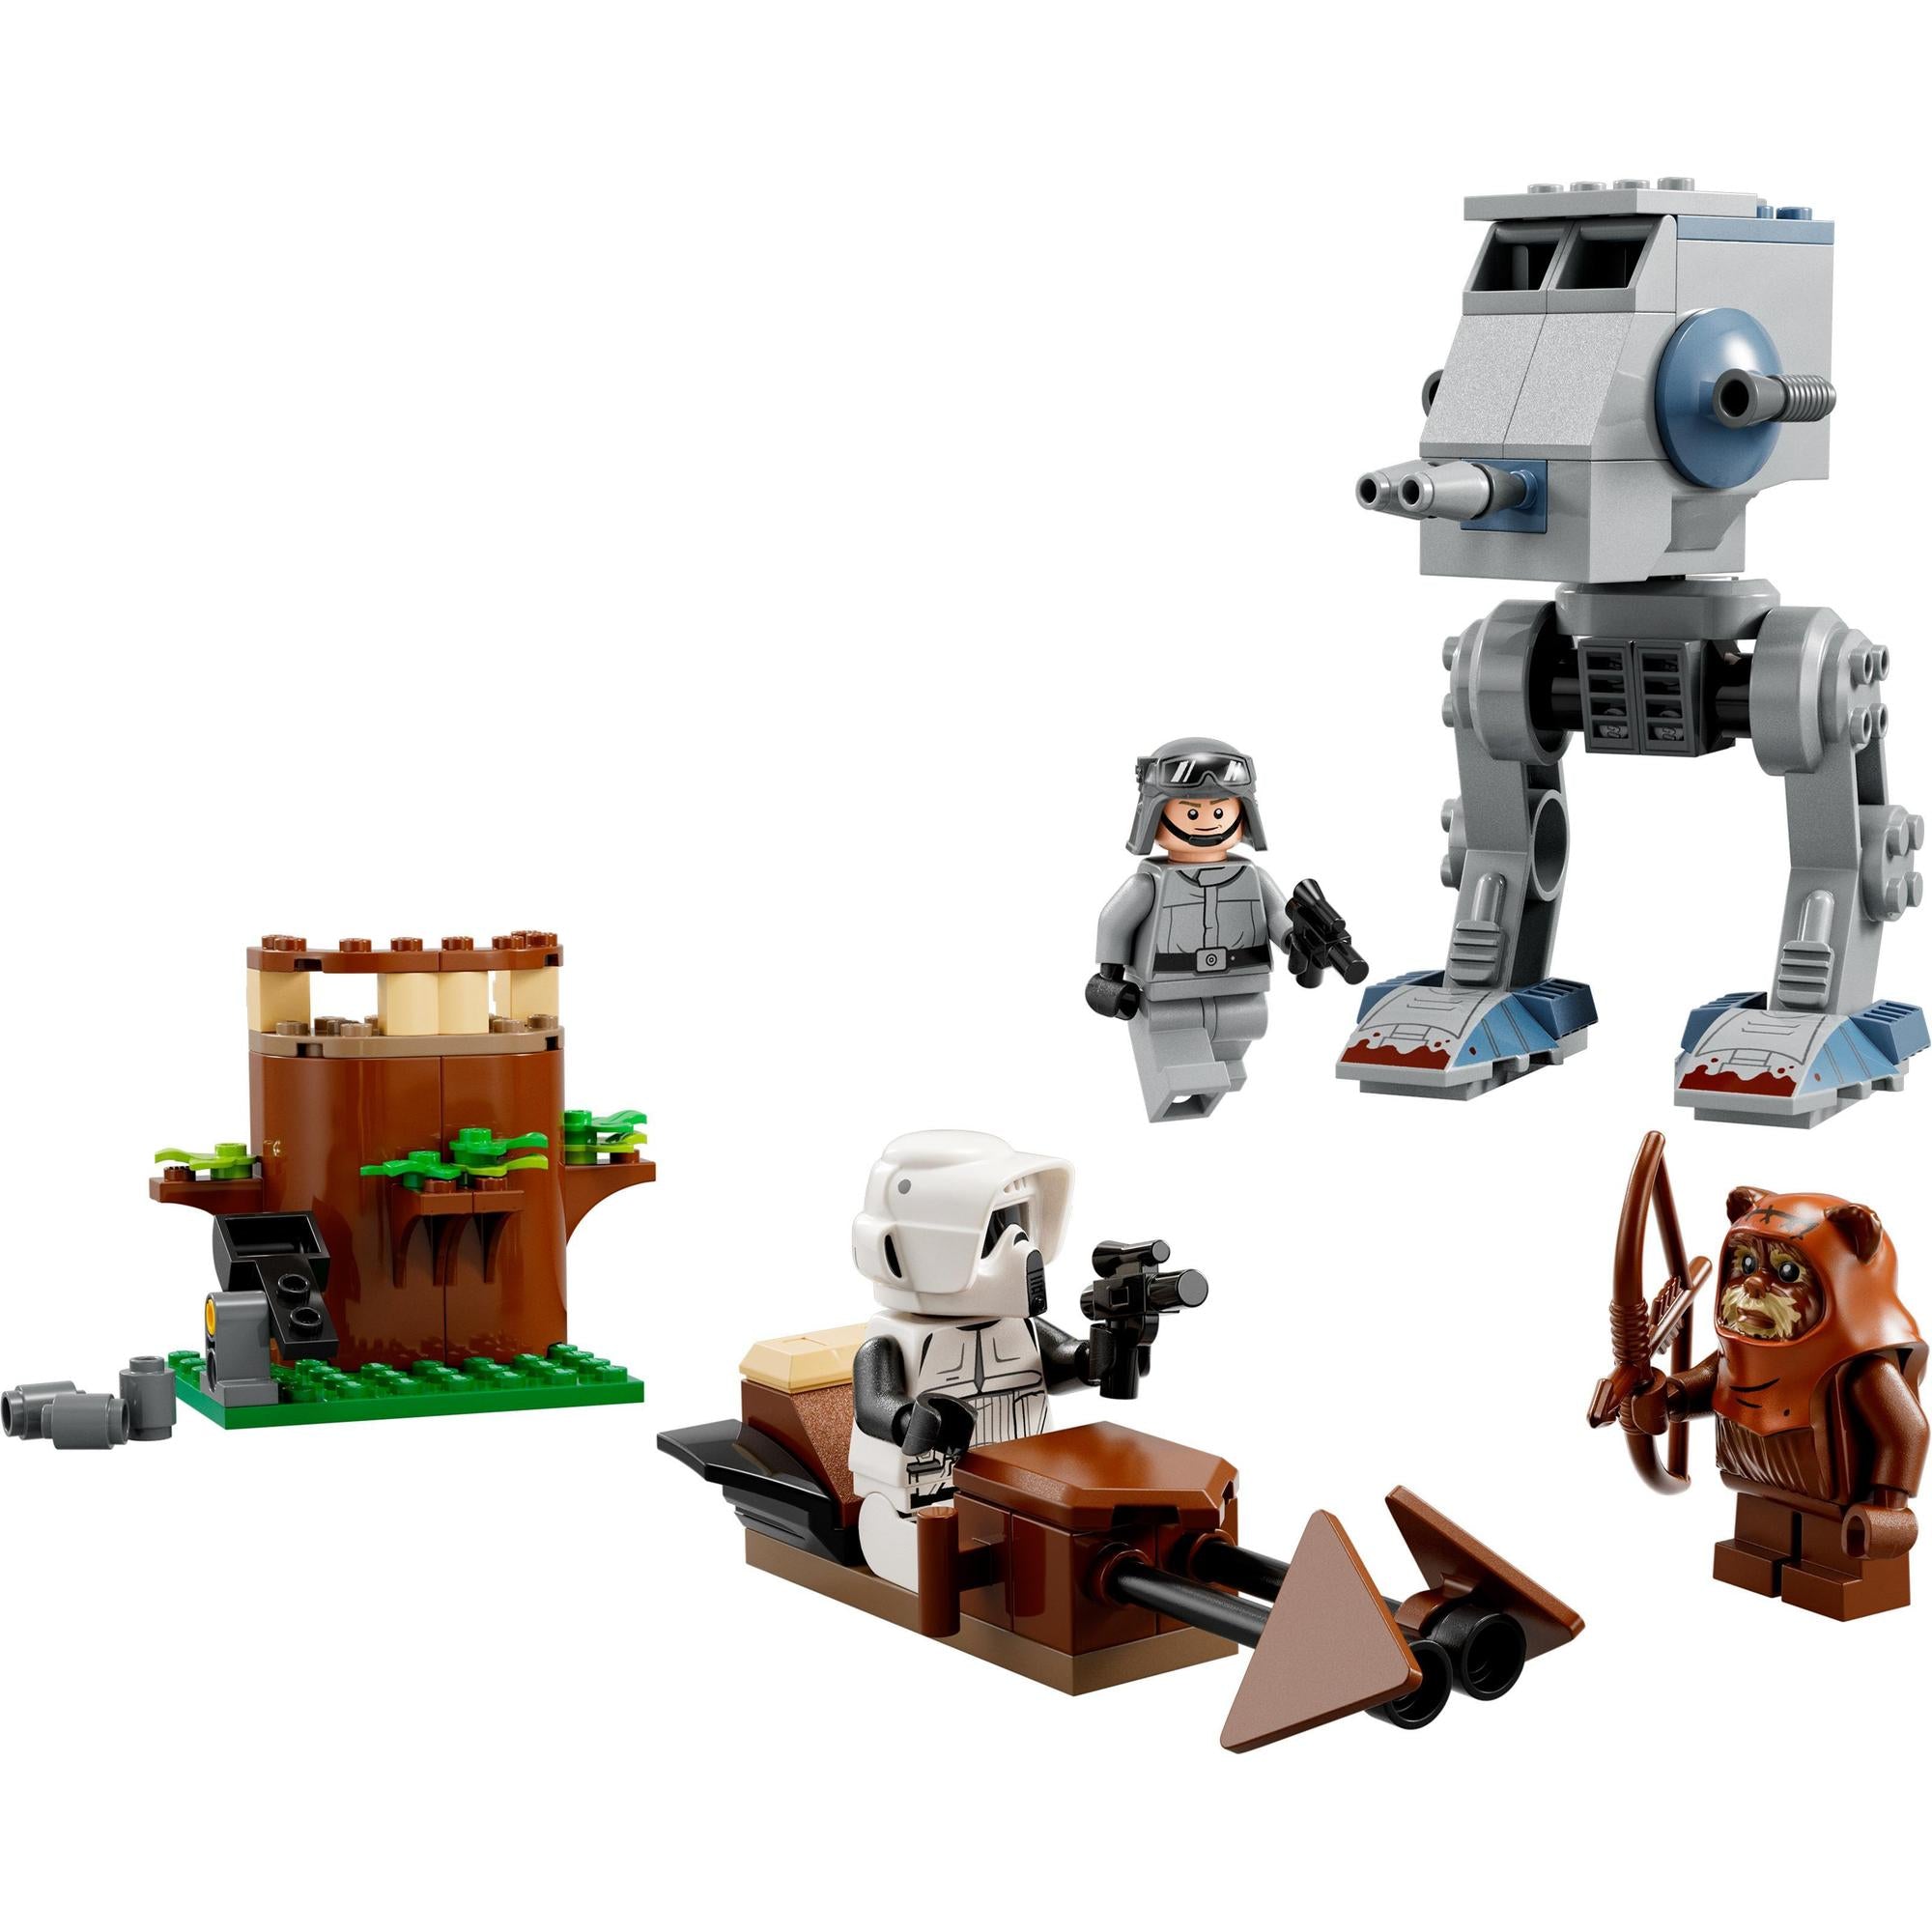 LEGO® | 75332 | AT-ST